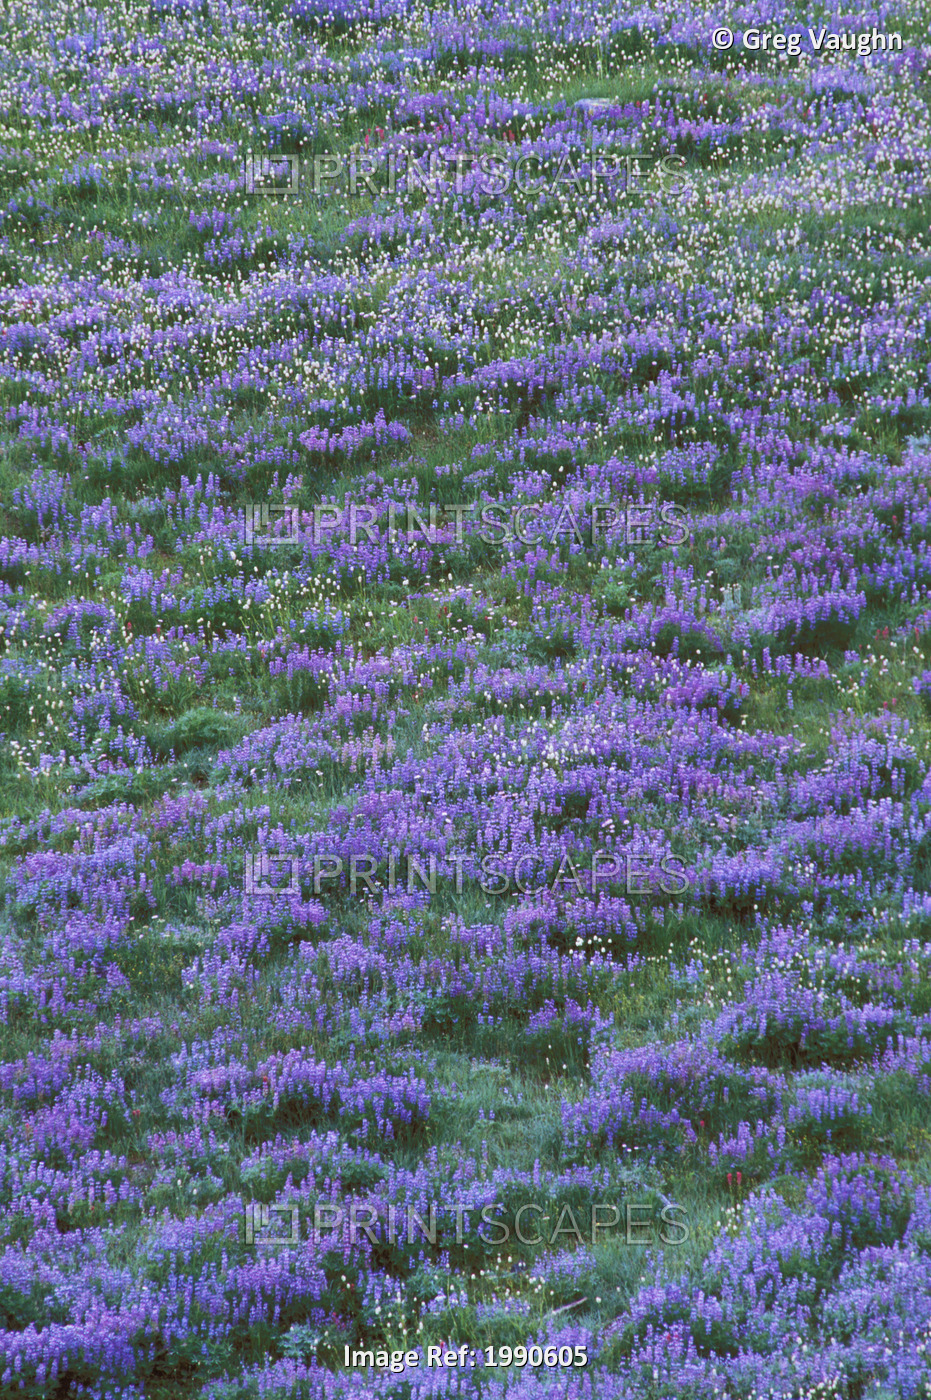 View Of Large Field Of Purple Lupines And Wildflowers Growing